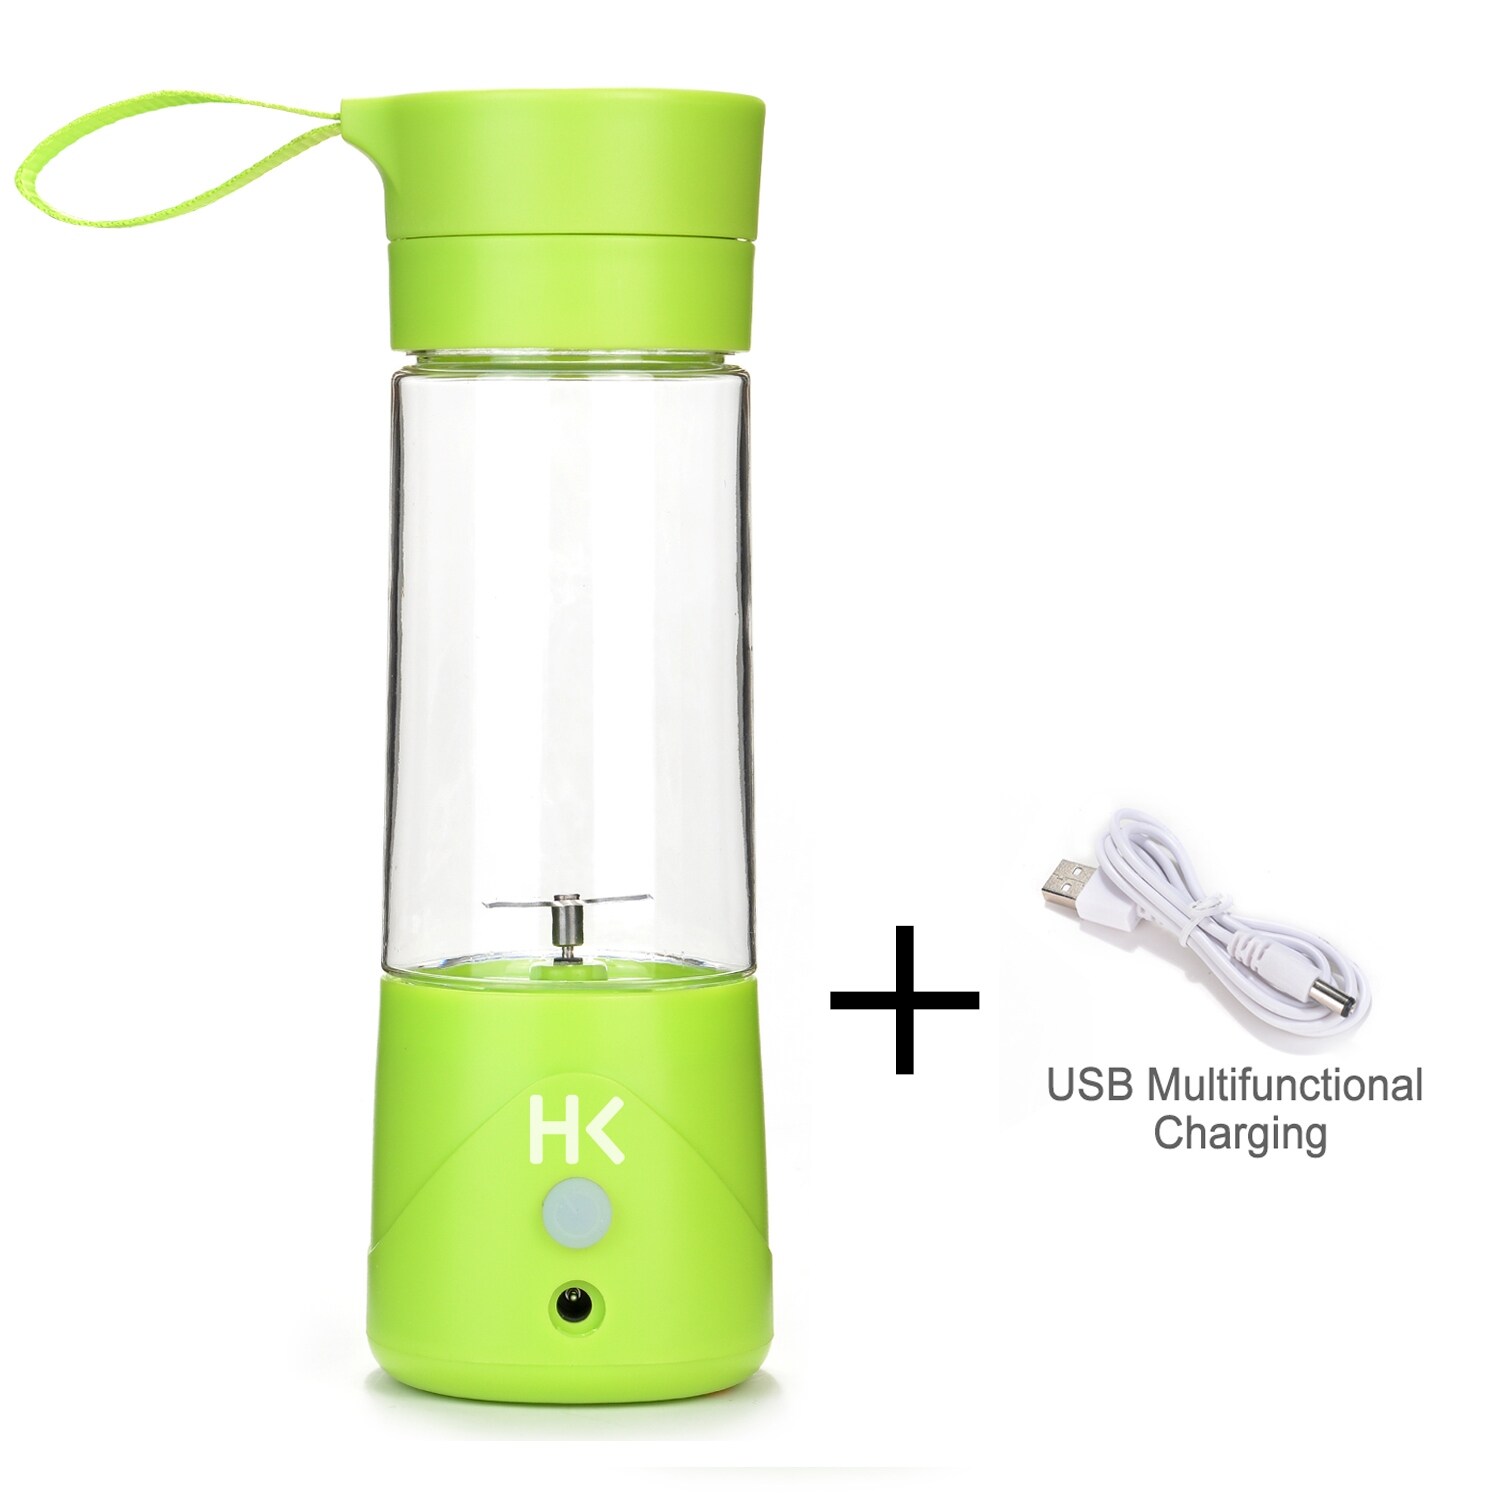 https://ak1.ostkcdn.com/images/products/is/images/direct/9a068bb1fa3c31c676424a5328b17a843f3105eb/380ml-Mini-USB-Juicer-Cup-Portable-Rechargeable-Fruit-Blender-Crusher-w--USB-Charge-Cable-Multifunctional.jpg